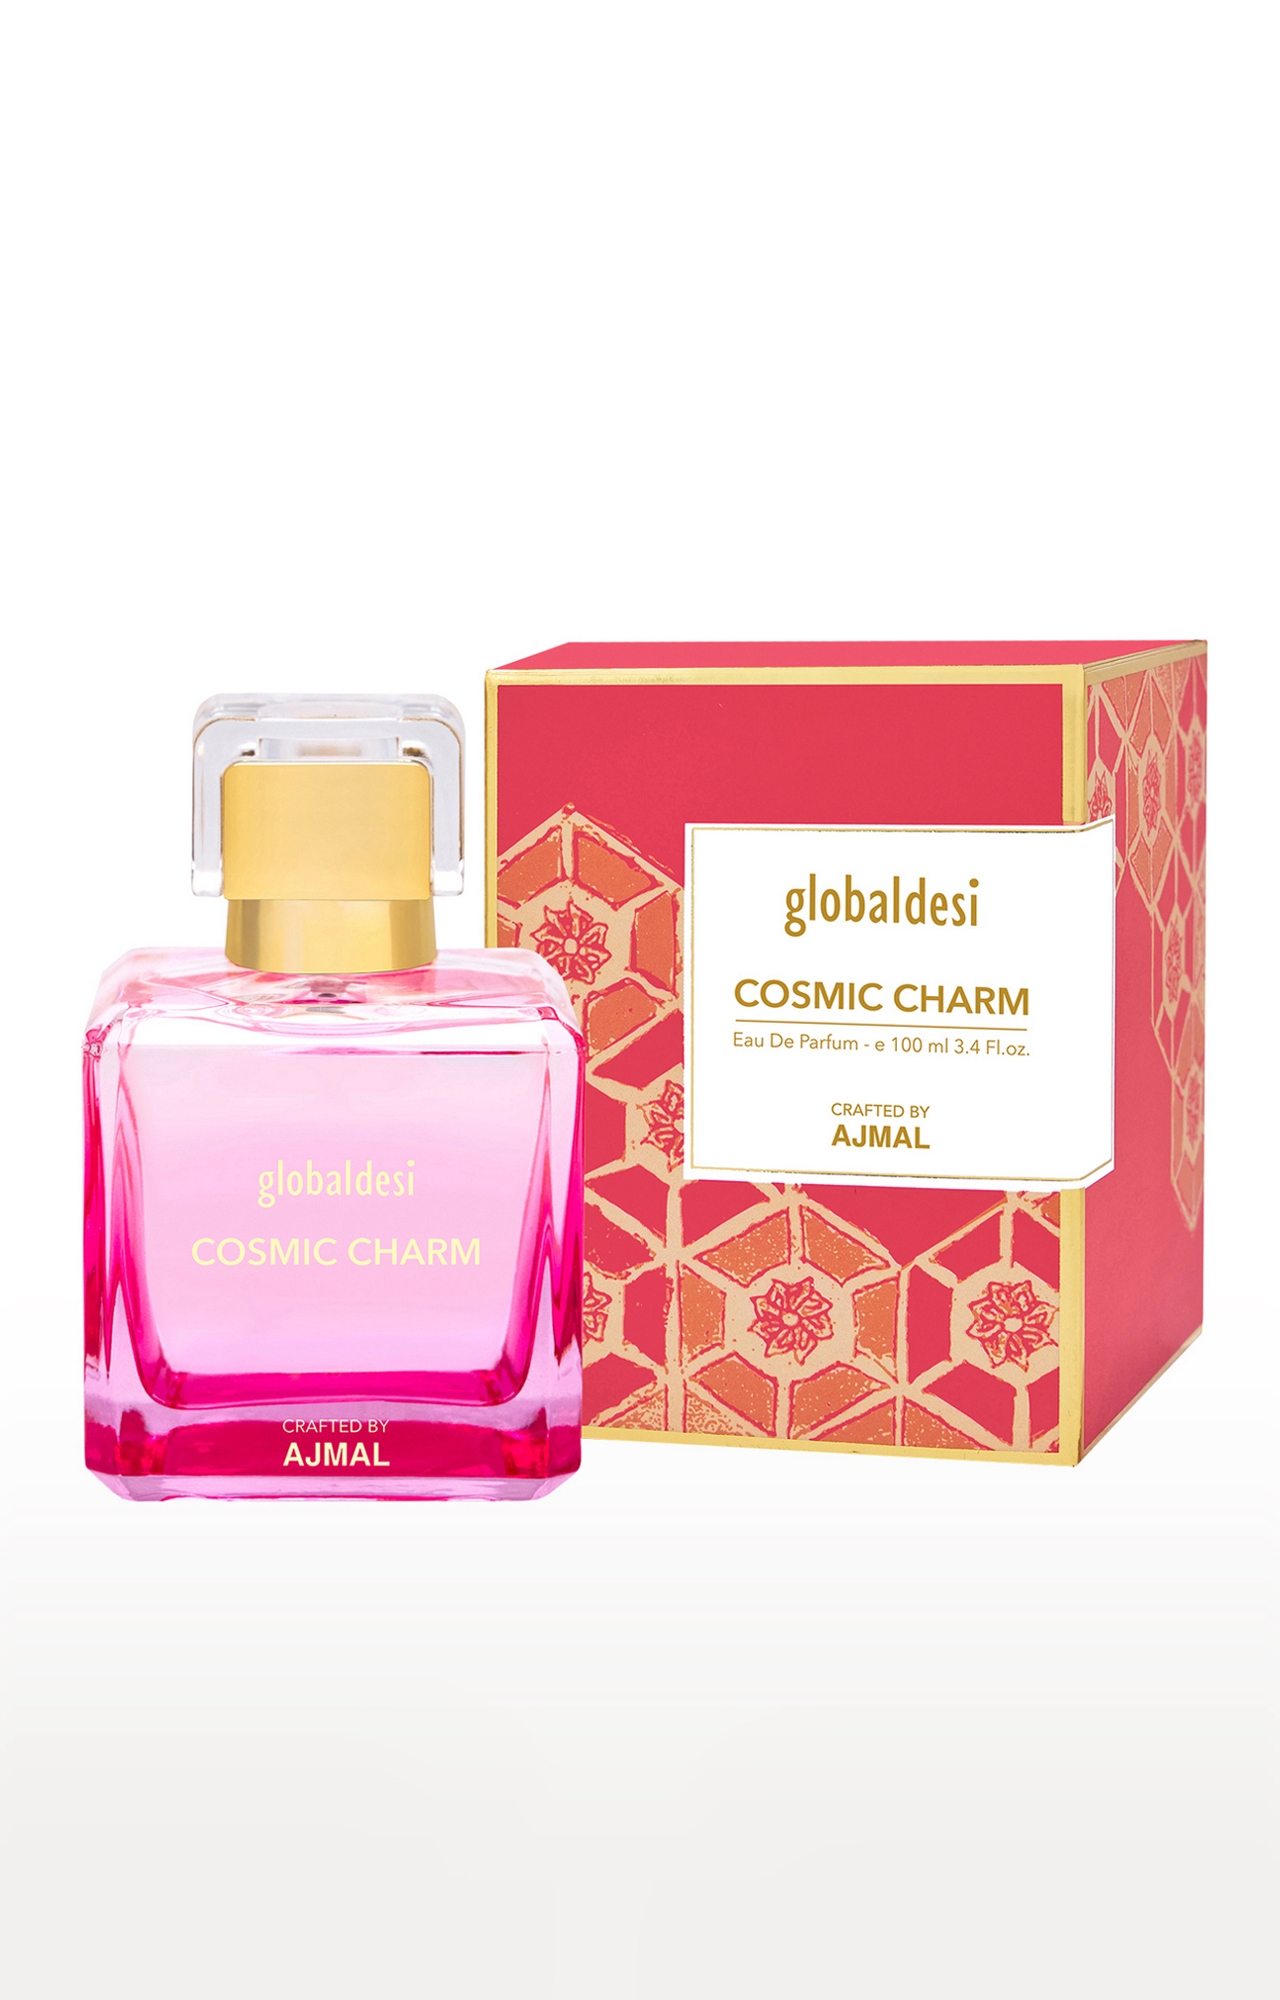 Global Desi Crafted By Ajmal | Global Desi Cosmic Charm Eau De Parfum 100ML Long Lasting Scent Spray Gift For Women Crafted By Ajmal 0